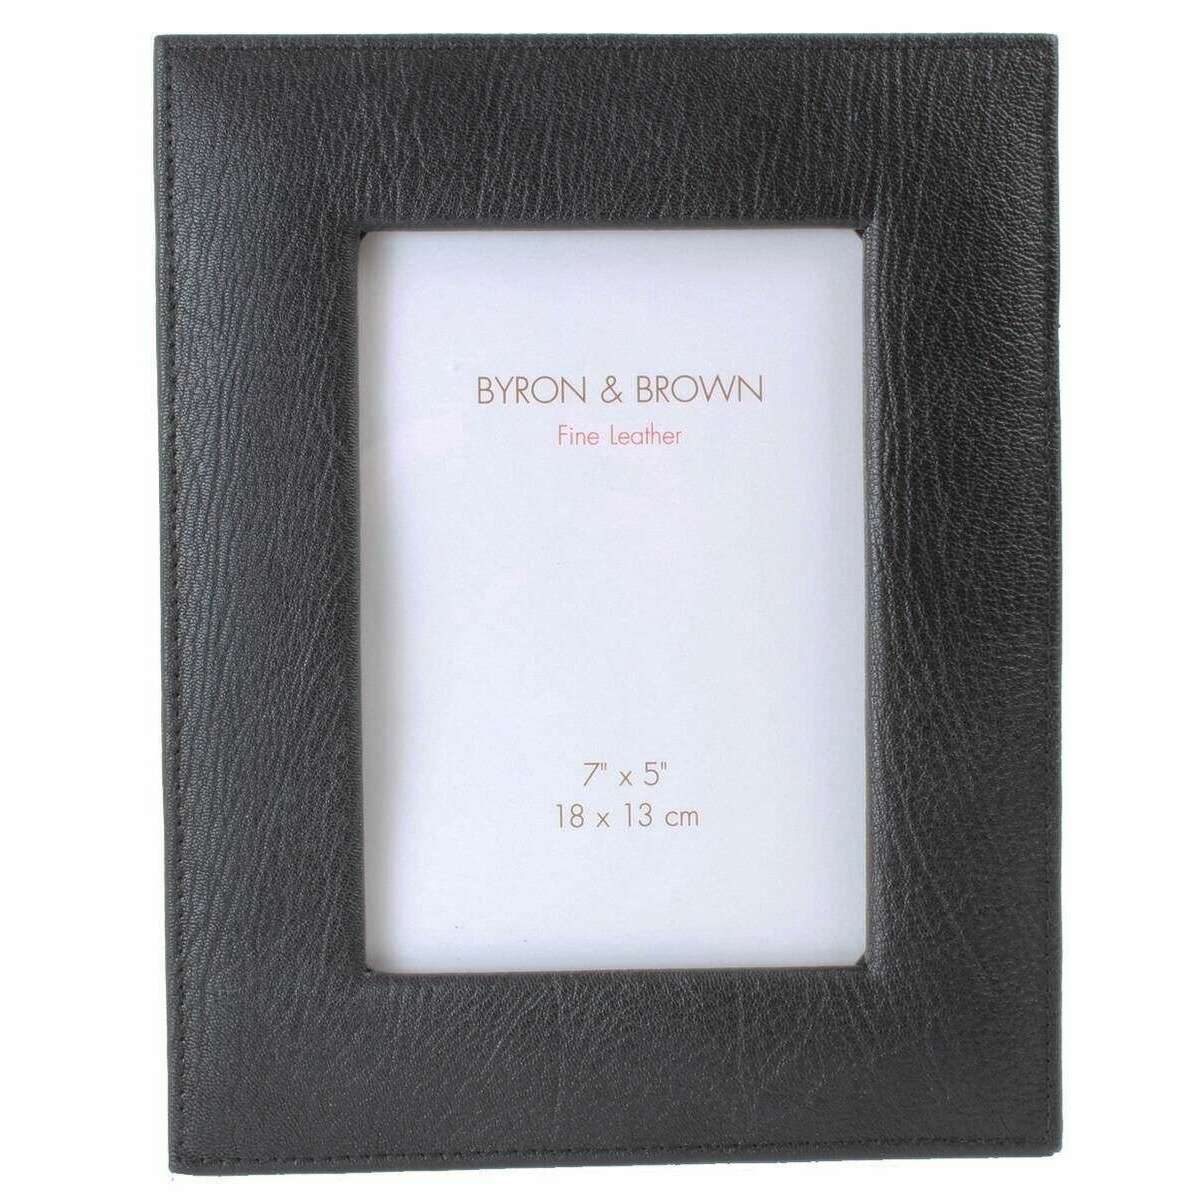 Byron and Brown Vintage Leather Photo Frame 7x5 - Black